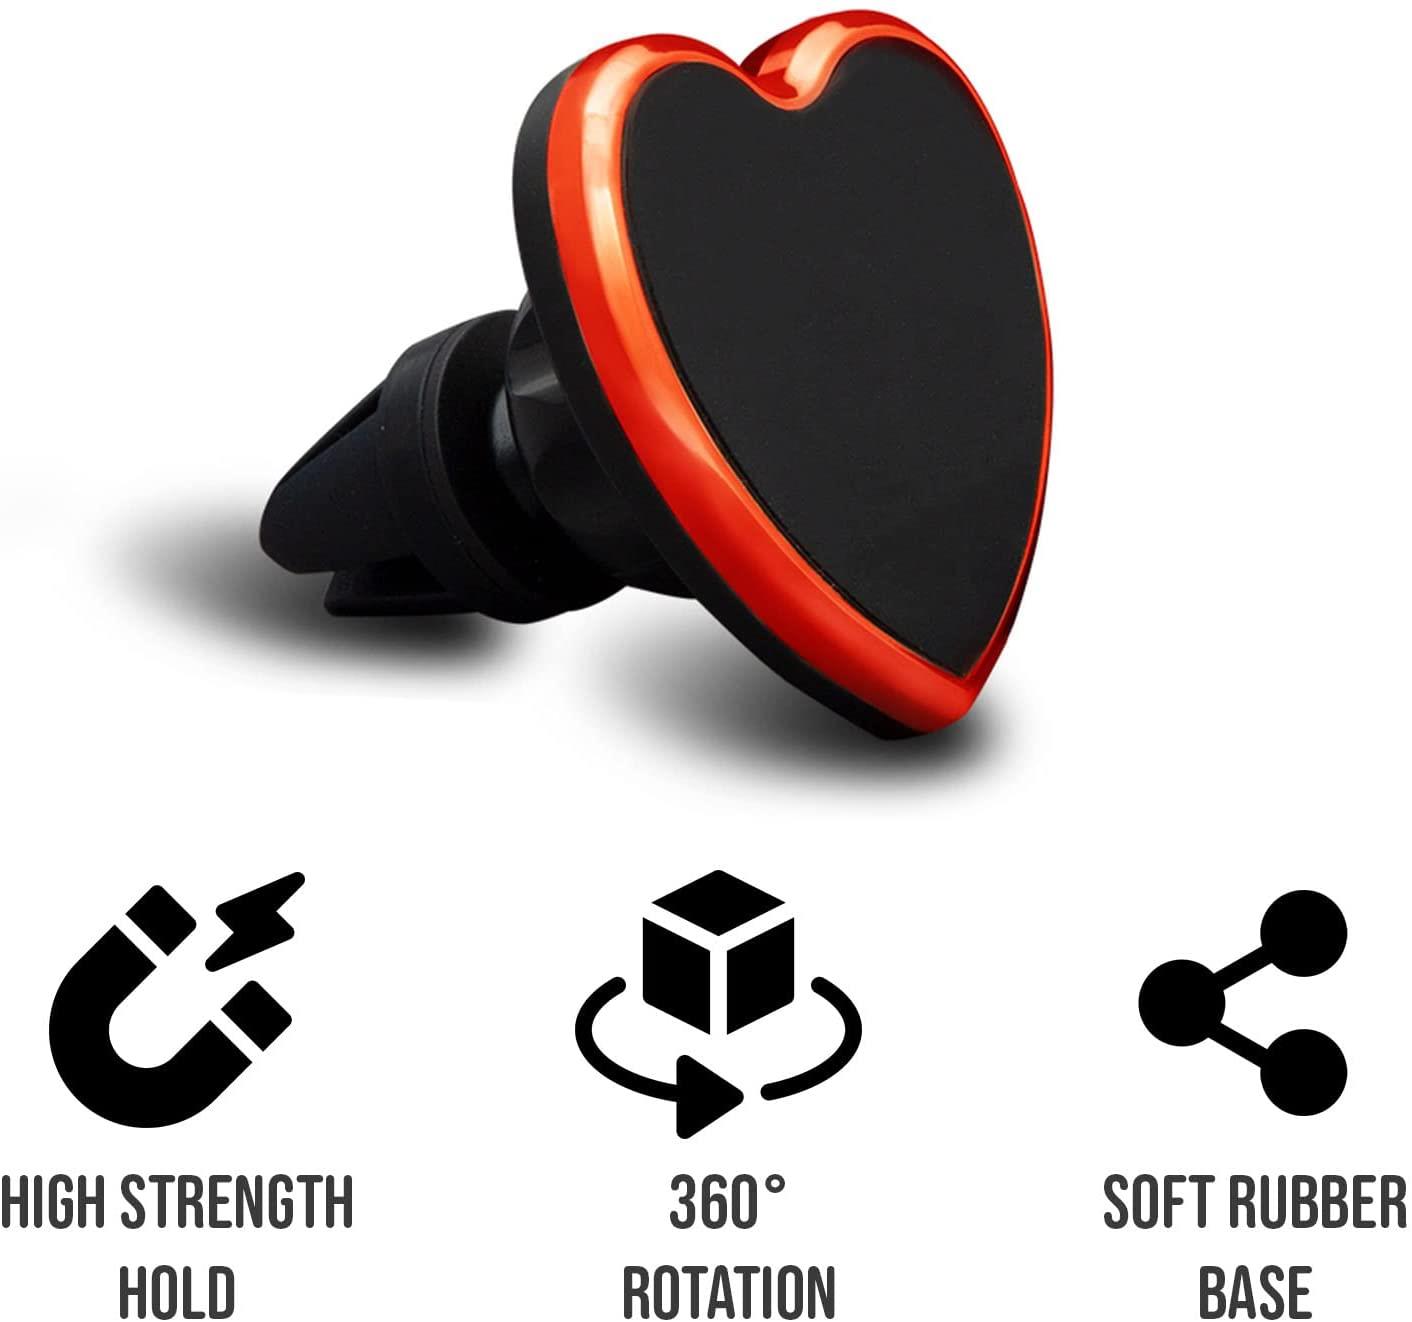 Aquarius Universal Magnetic Phone Car Mount - Red Heart Shaped Phone Holder with Firm Grip